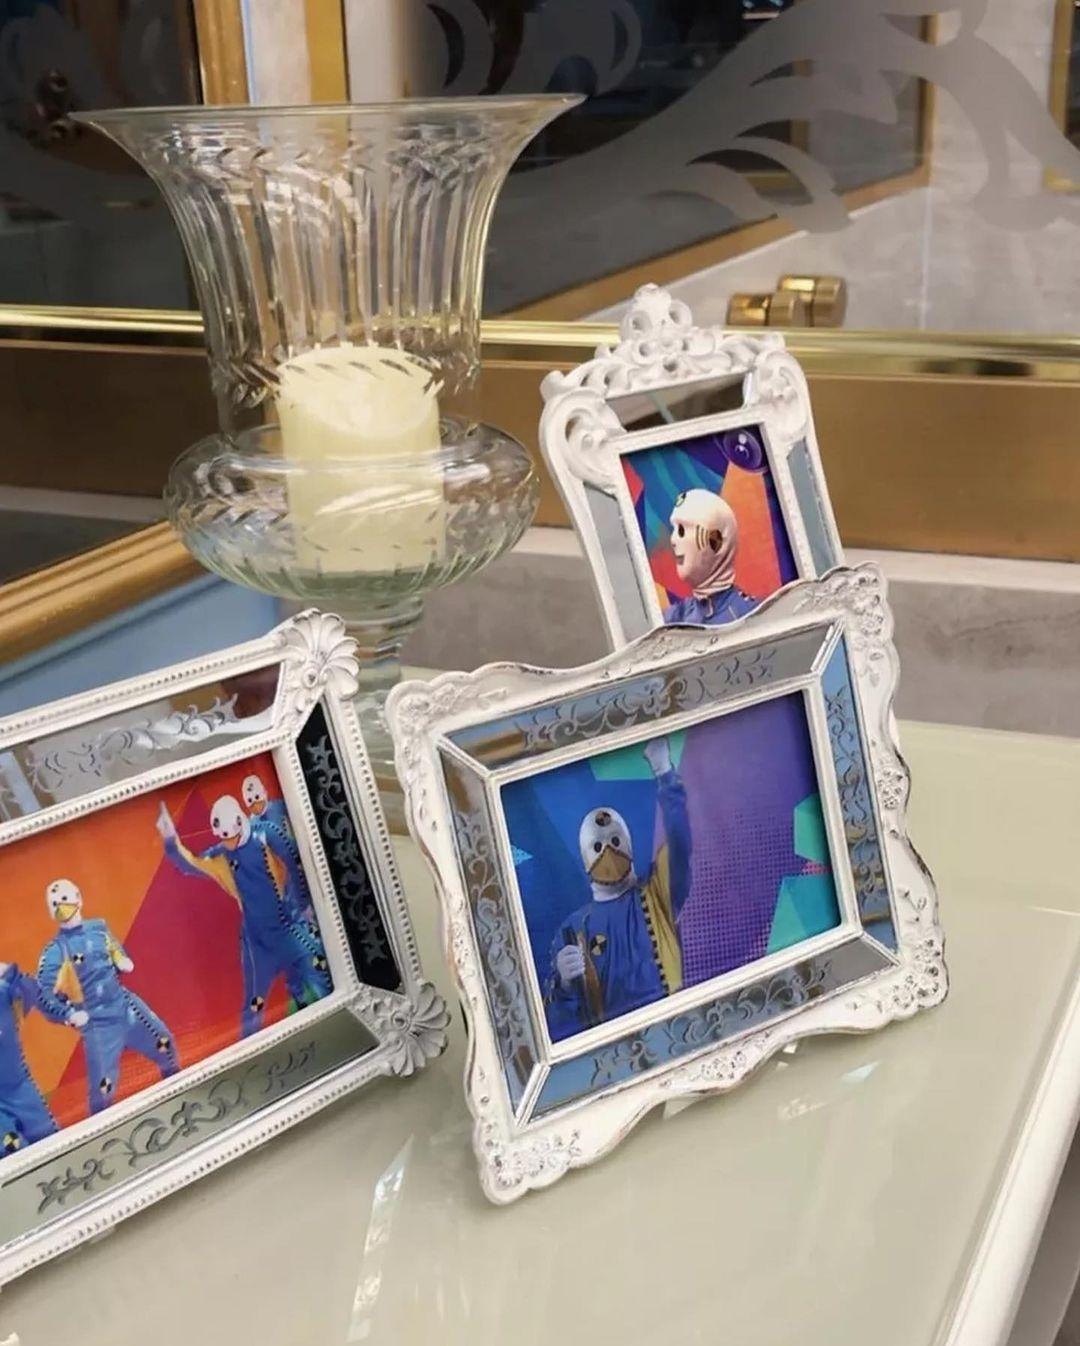 Dolls in frames in the leader's room "BBB 101 Day" - clone / Instagram